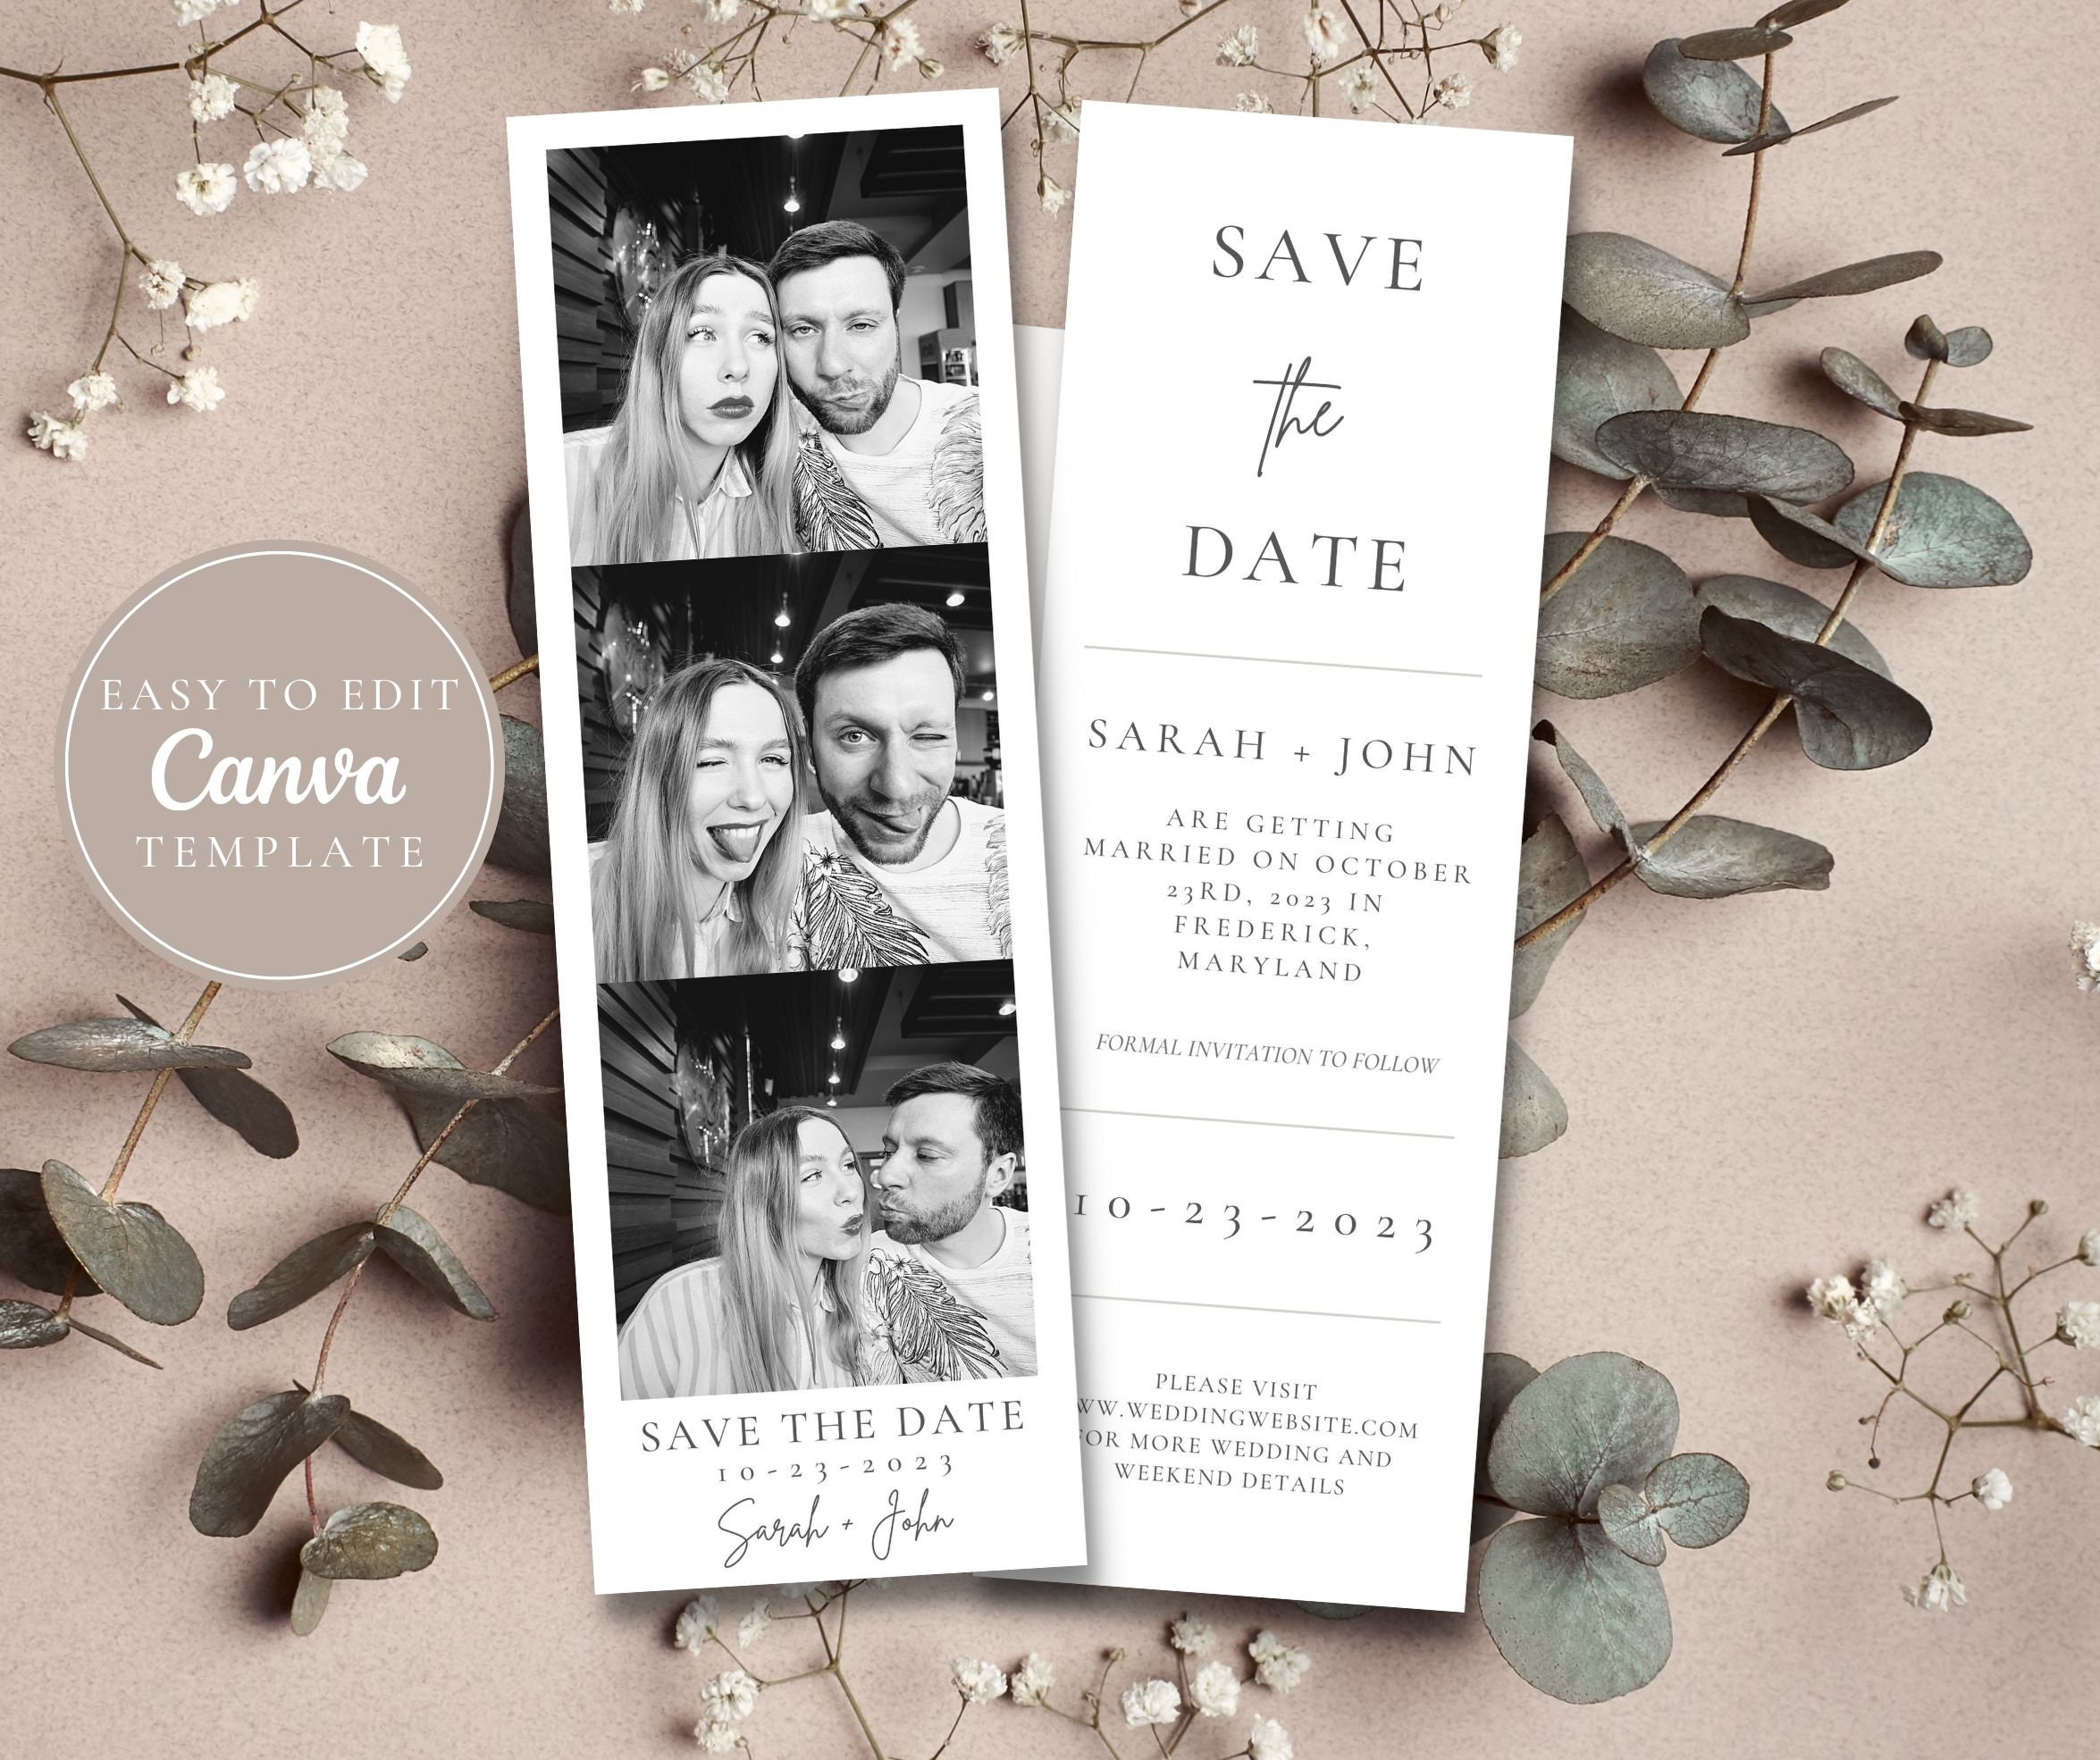  Photo Booth Frames - Clear Photo Booth Bookmark